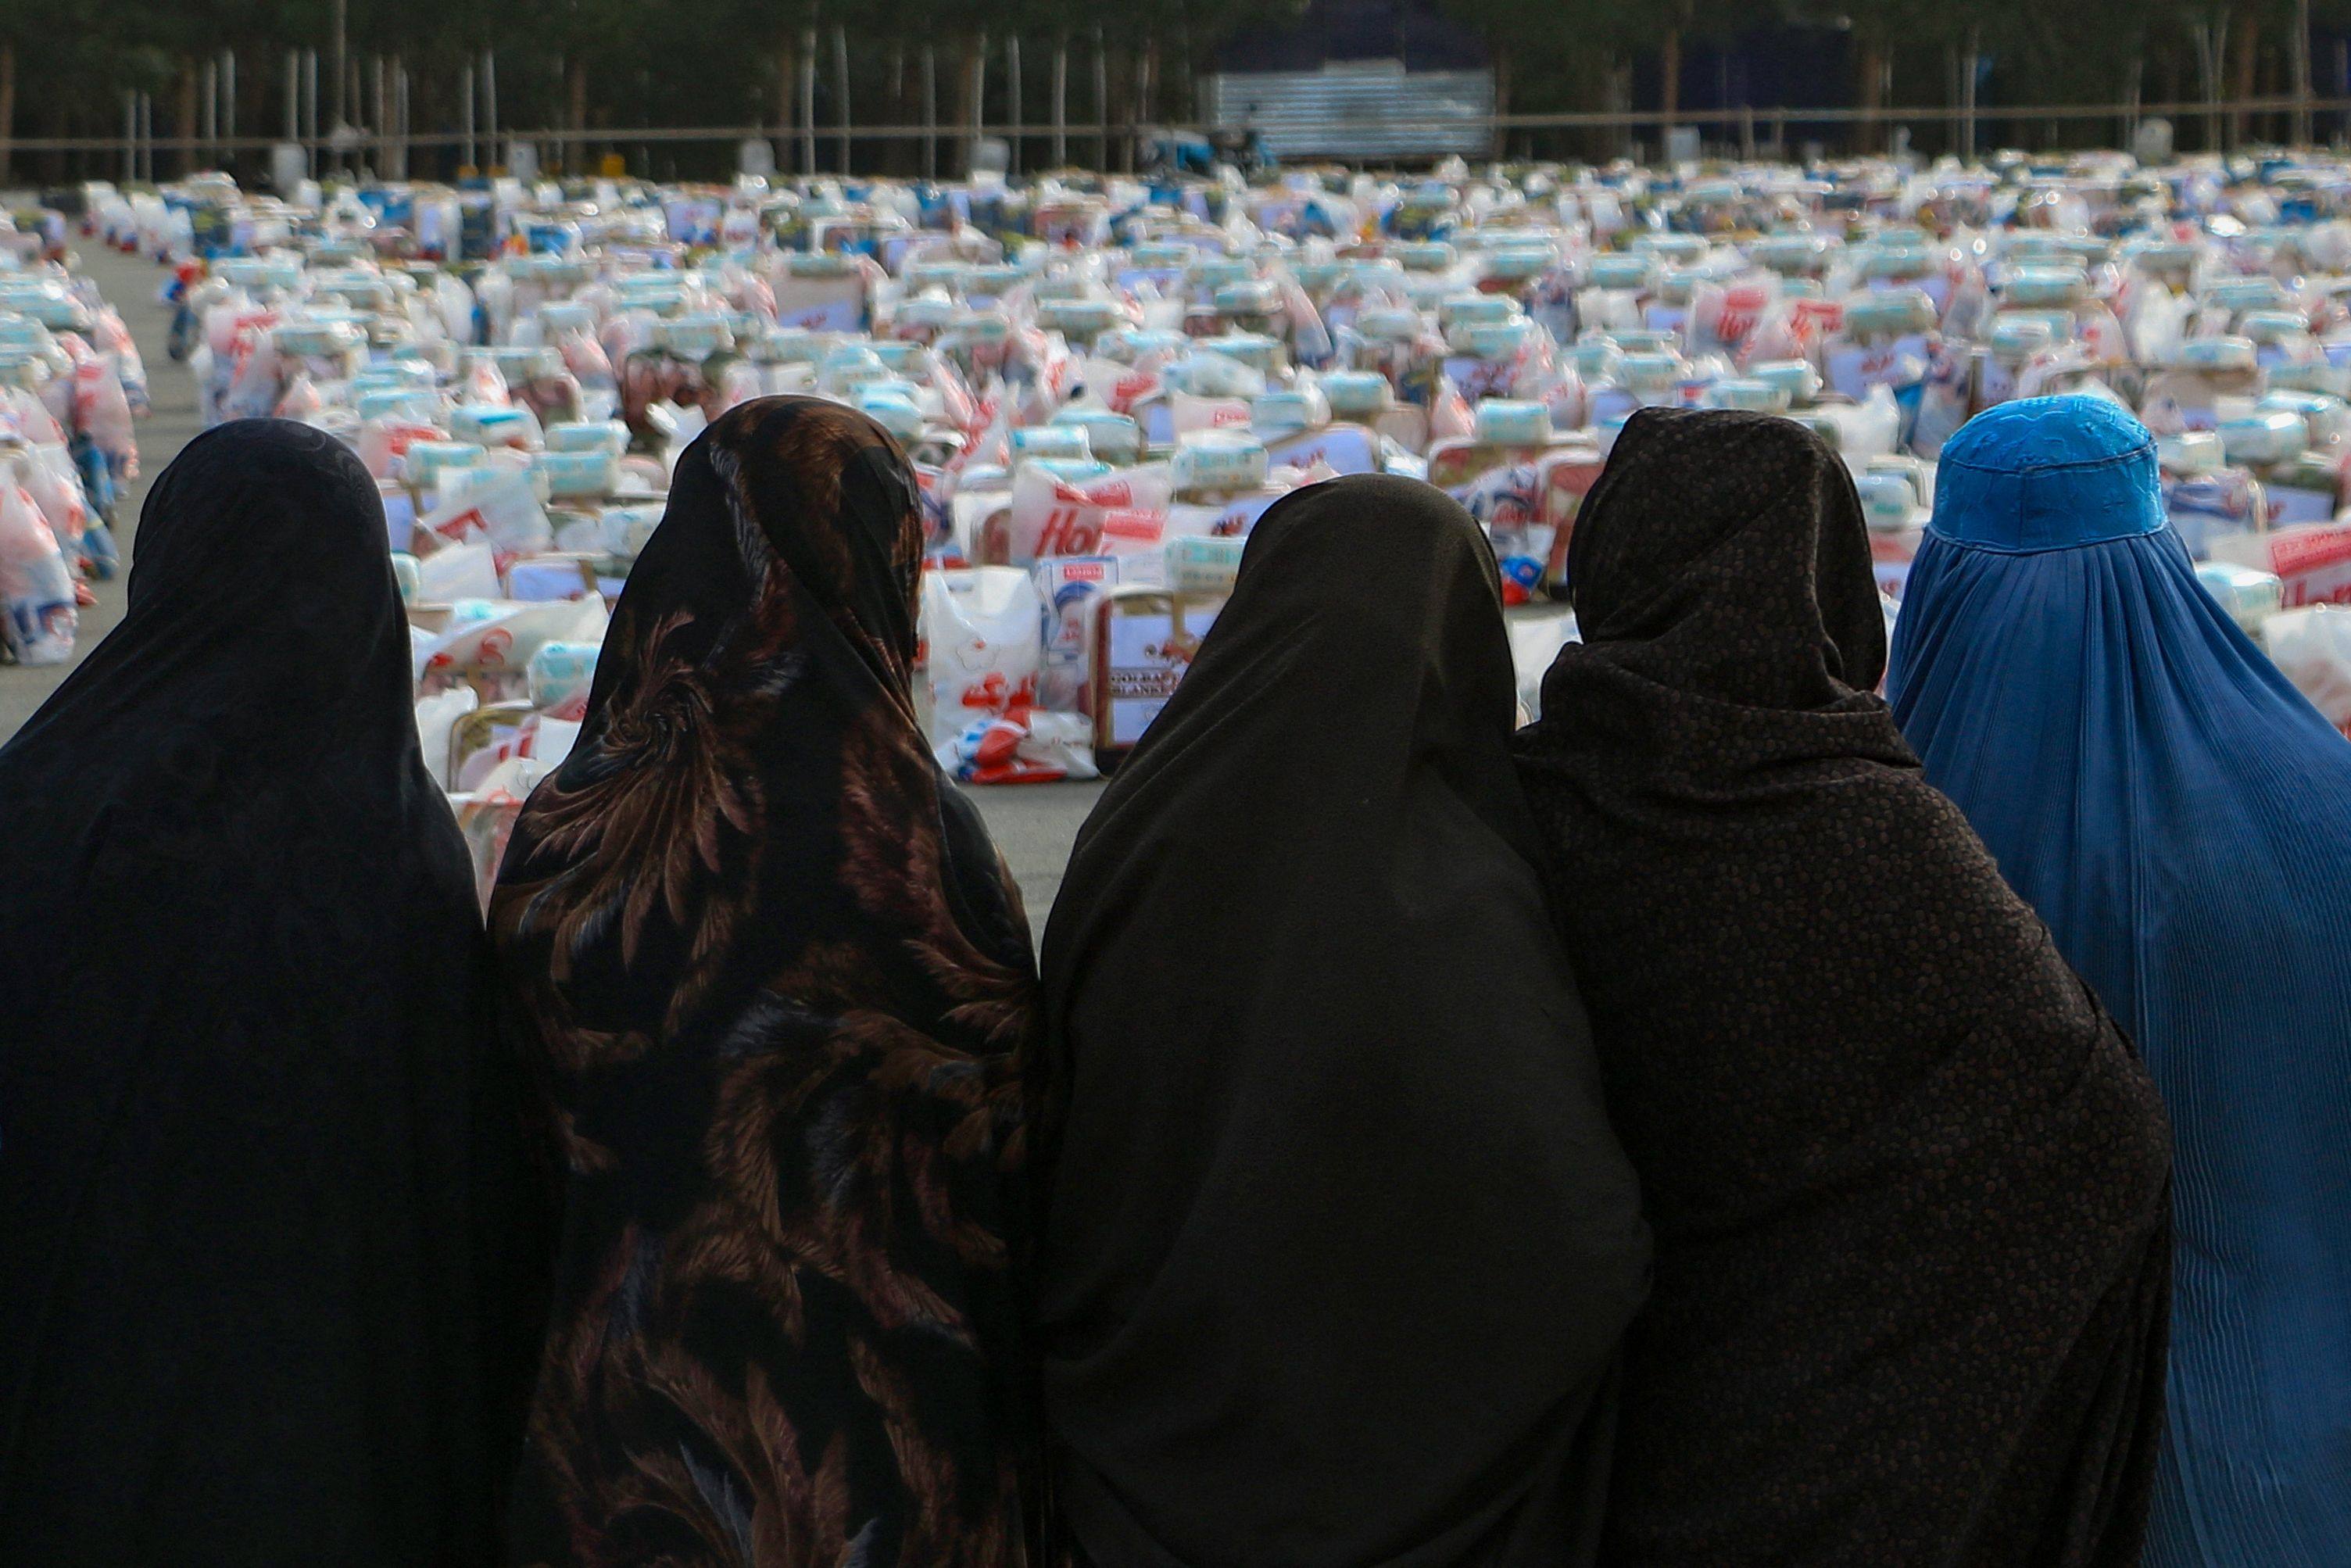 Afghan women wait to receive aid packages which includes food, clothes, and sanitary materials, distributed by a local charity foundation in Herat. The Taliban have barred women from most areas of public life. Photo: AFP